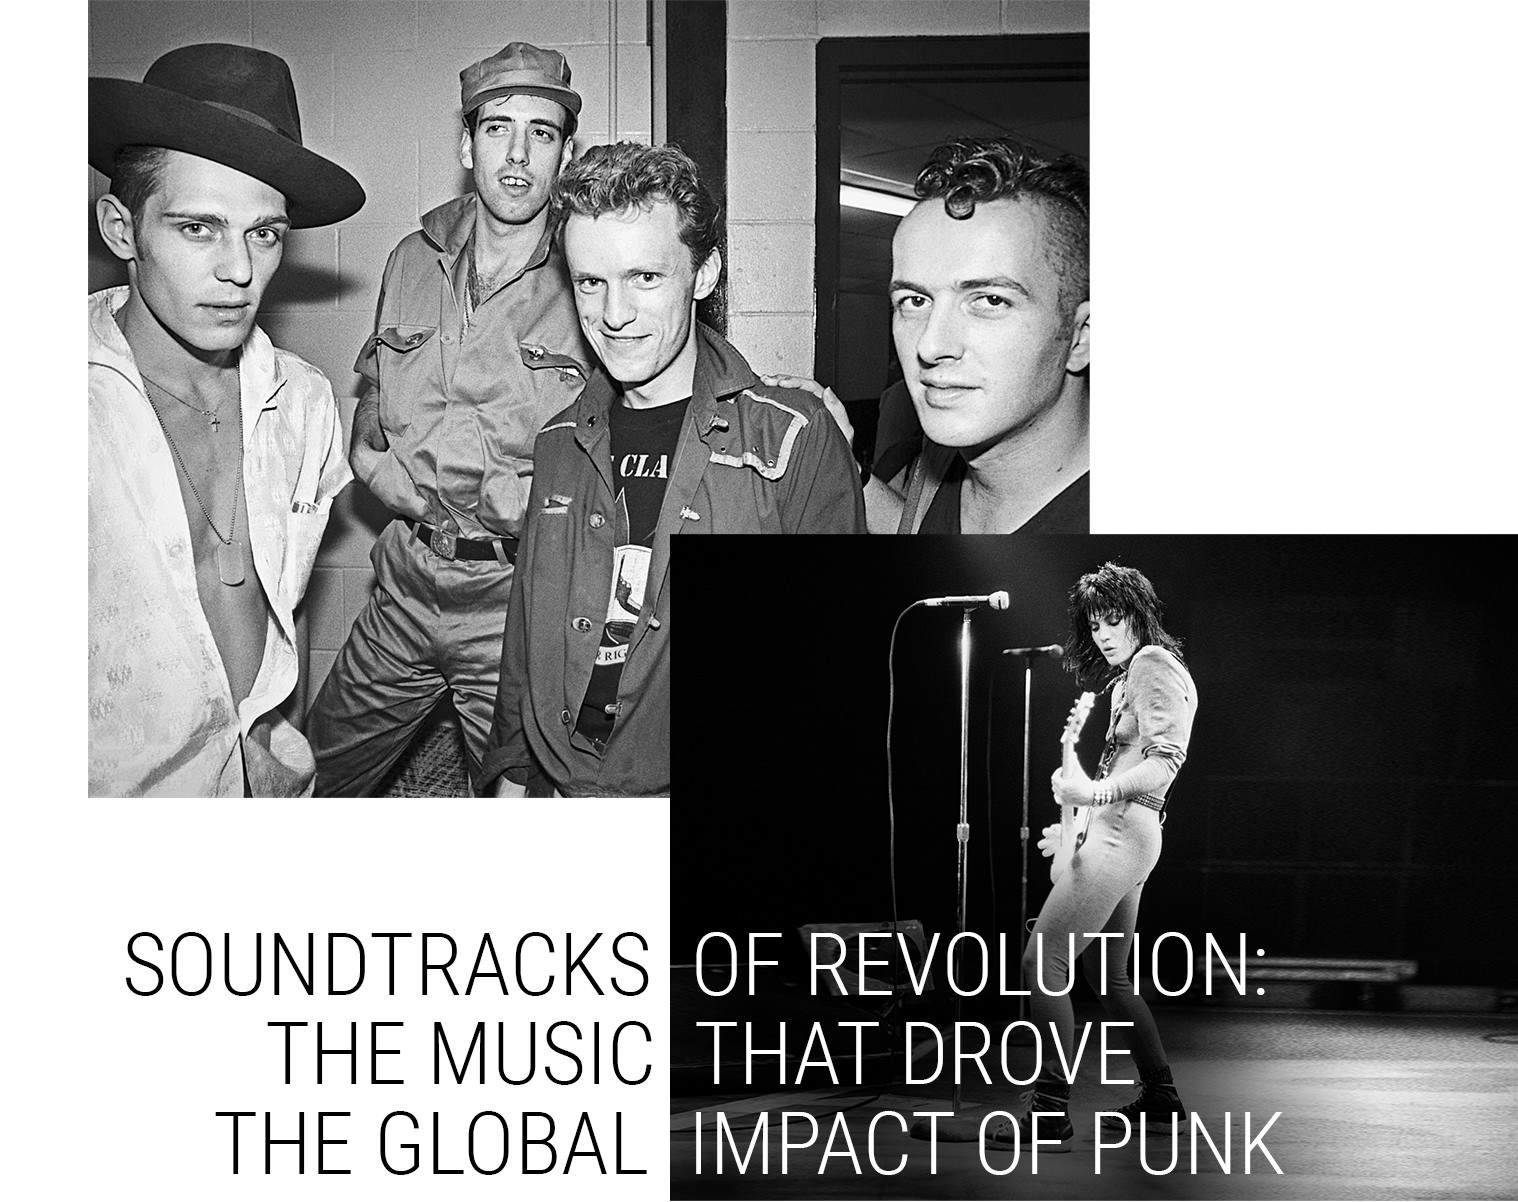 The-Music-That-Drove-The-Global-Impact-of-Punk-Header-3.jpg